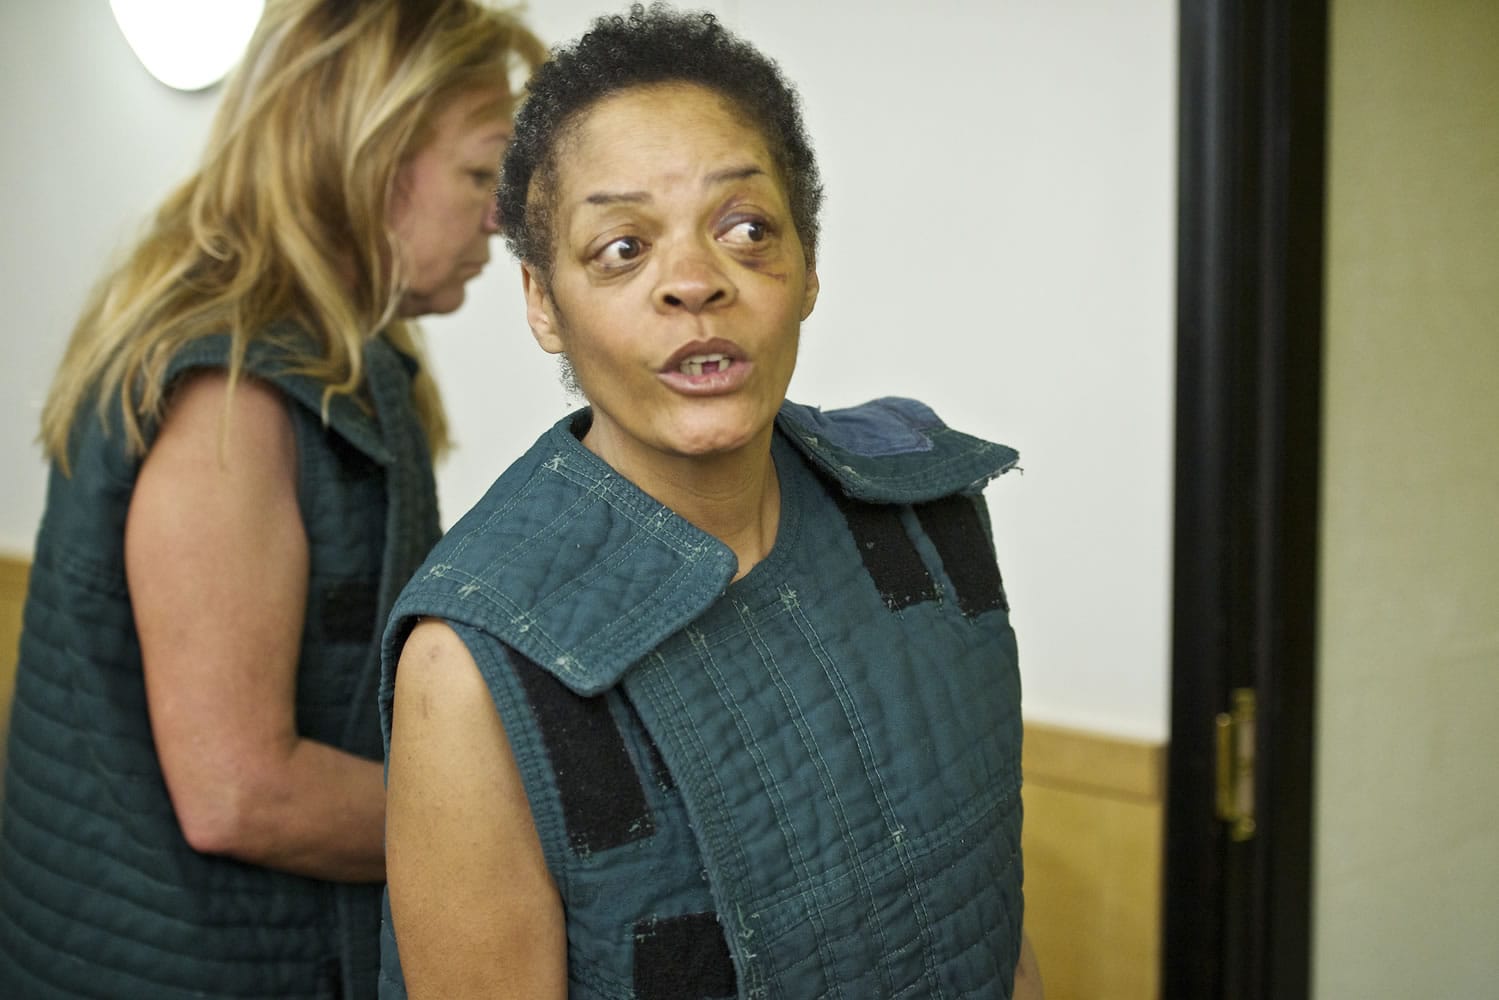 Donna Rae Williams, 51, makes a first appearance in court May 31 on a first-degree murder charge.